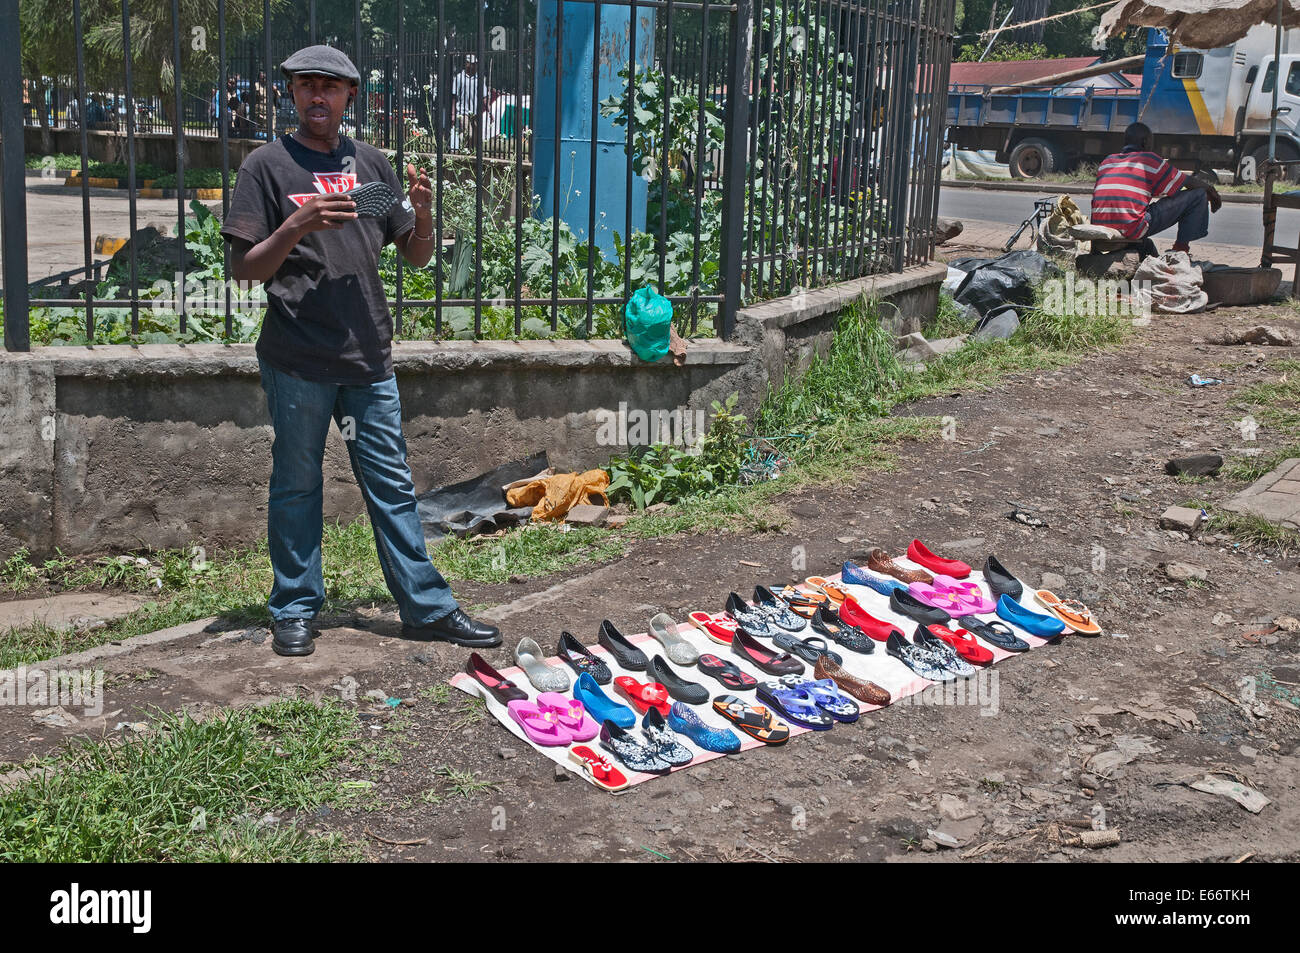 Man trying to sell shoes footware flip flops at side of road with shoes displayed on piece of cloth Stock Photo